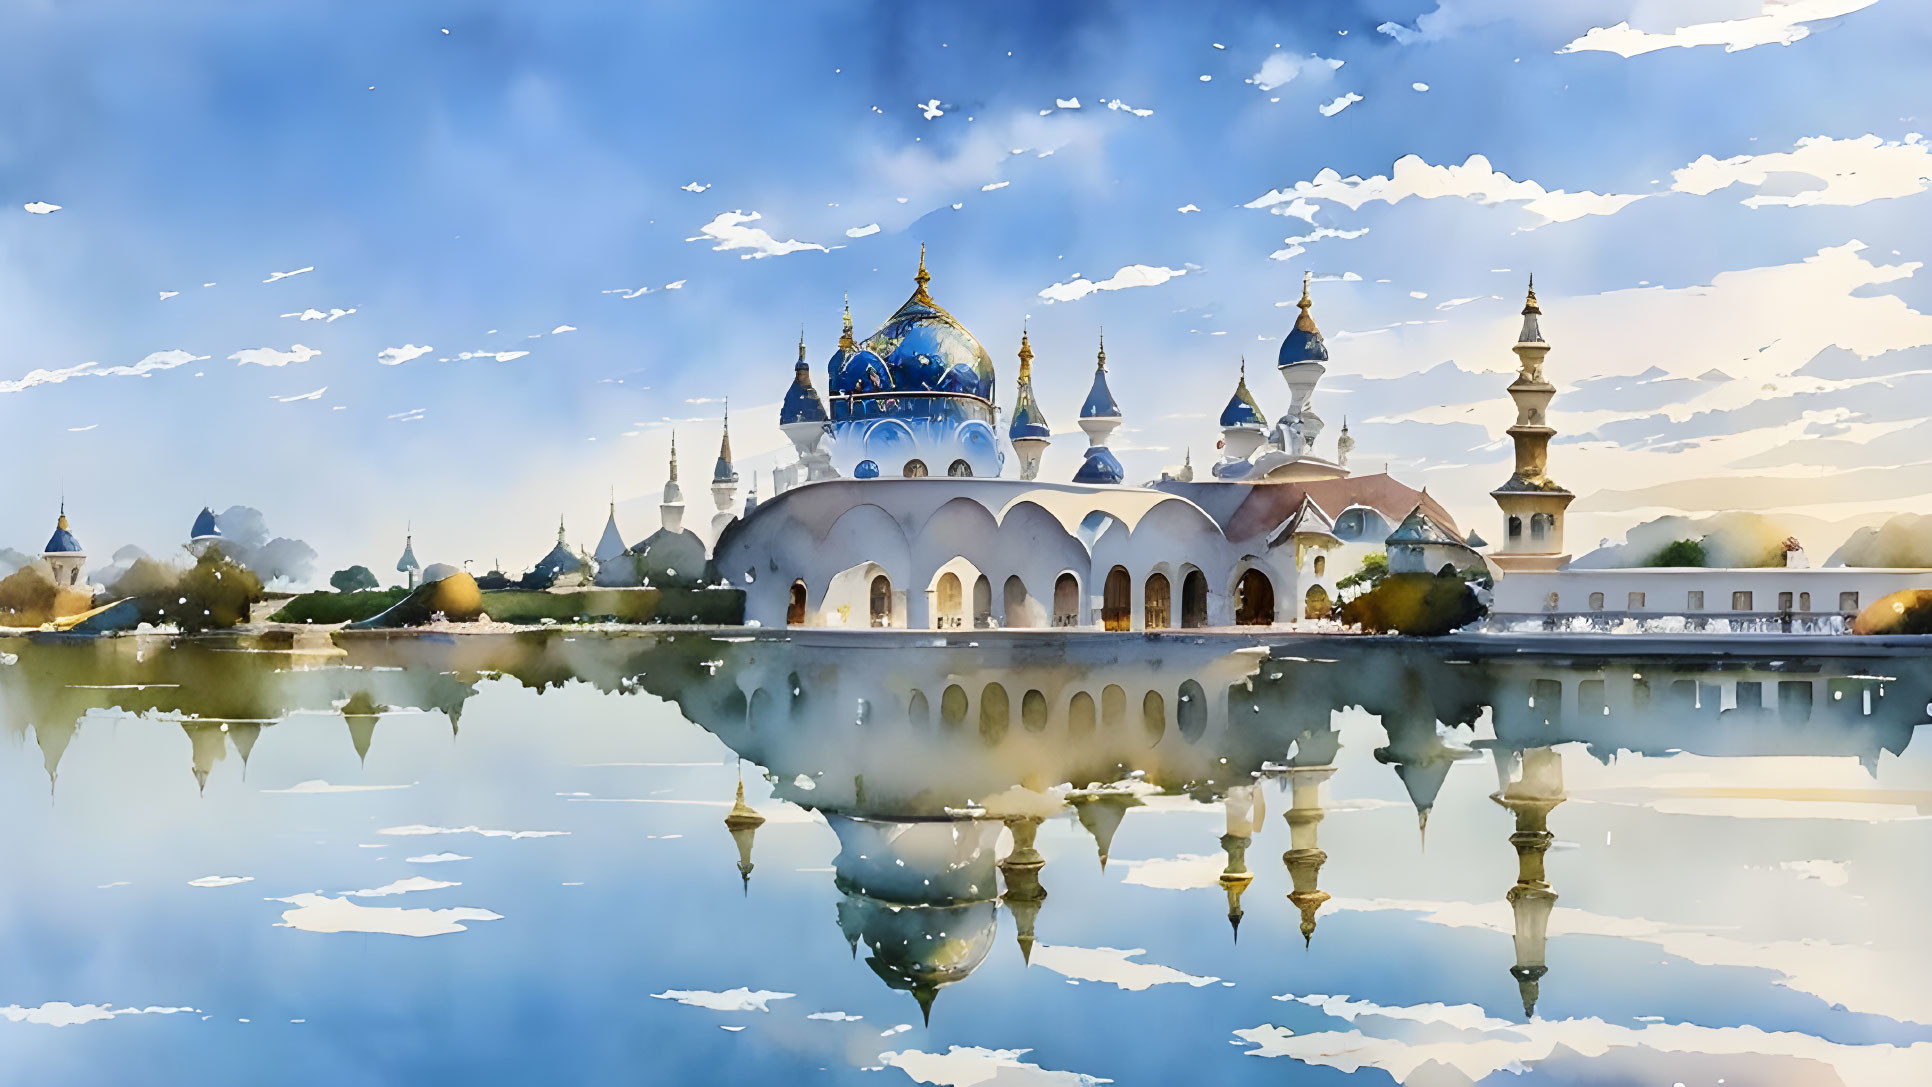 Majestic mosque with blue domes and spires reflected in water